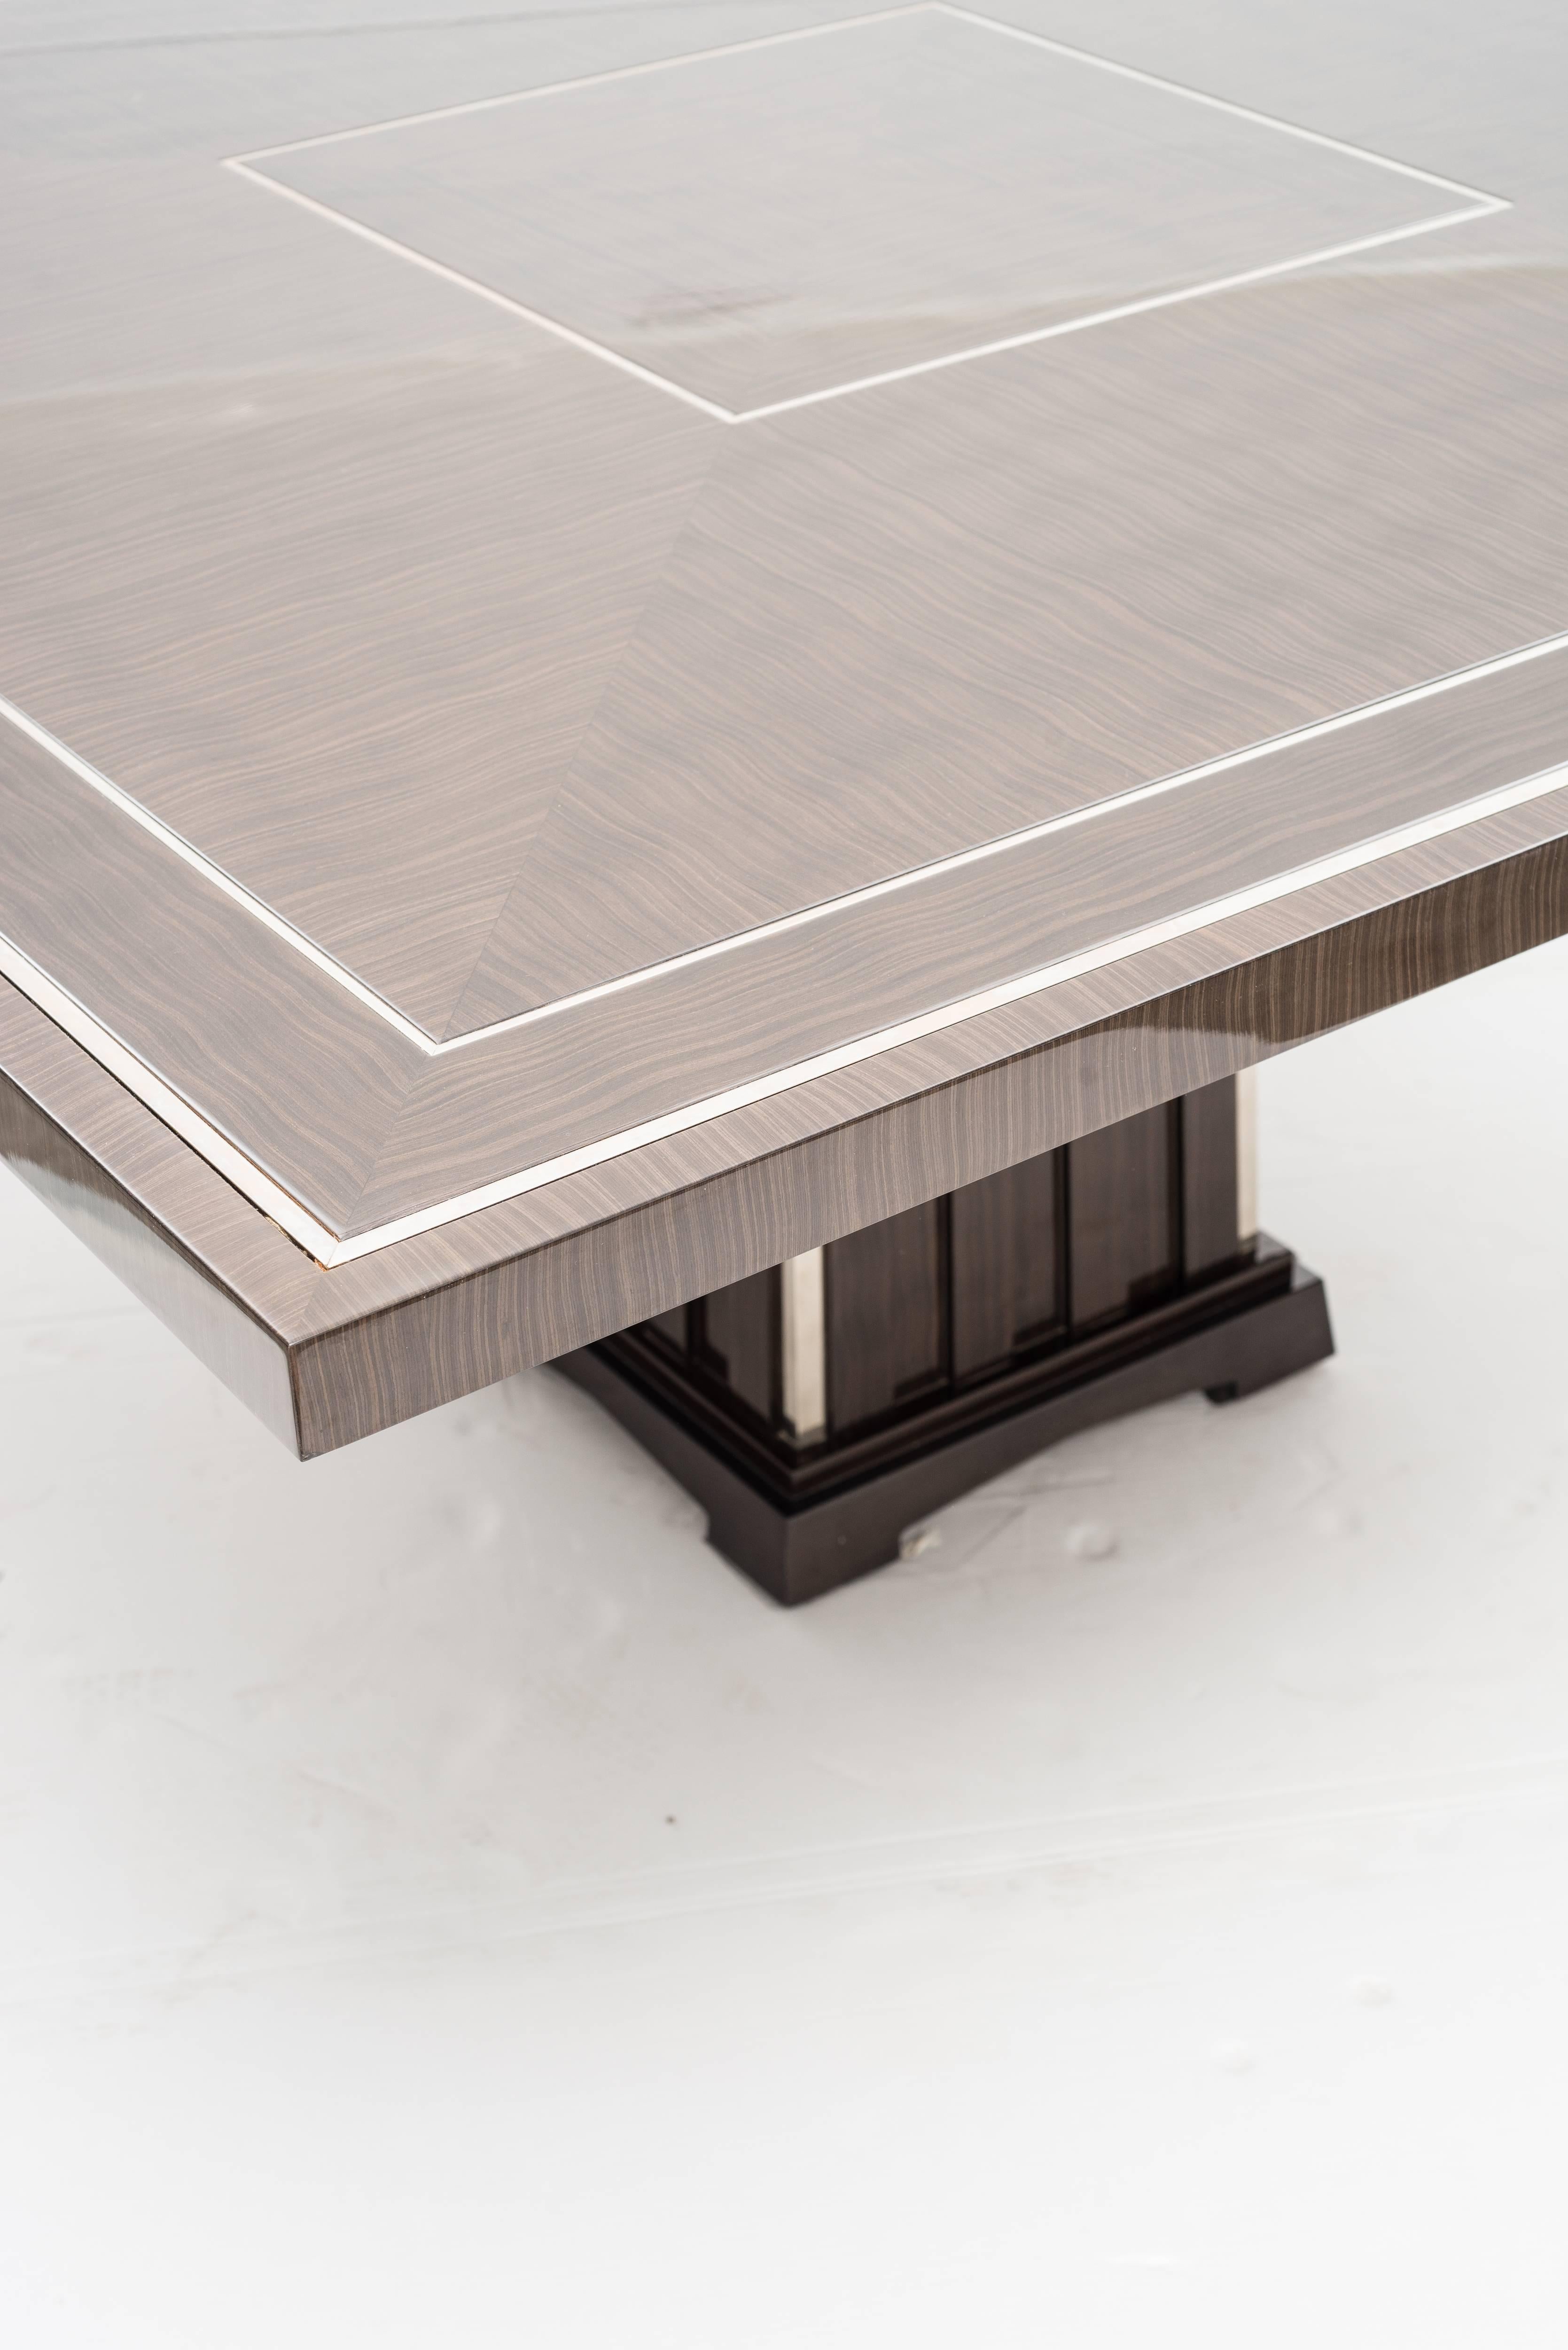 Italian Fine Bespoke Dining Room Table, Veneer Wood Top and Base with Chrome Inserts For Sale